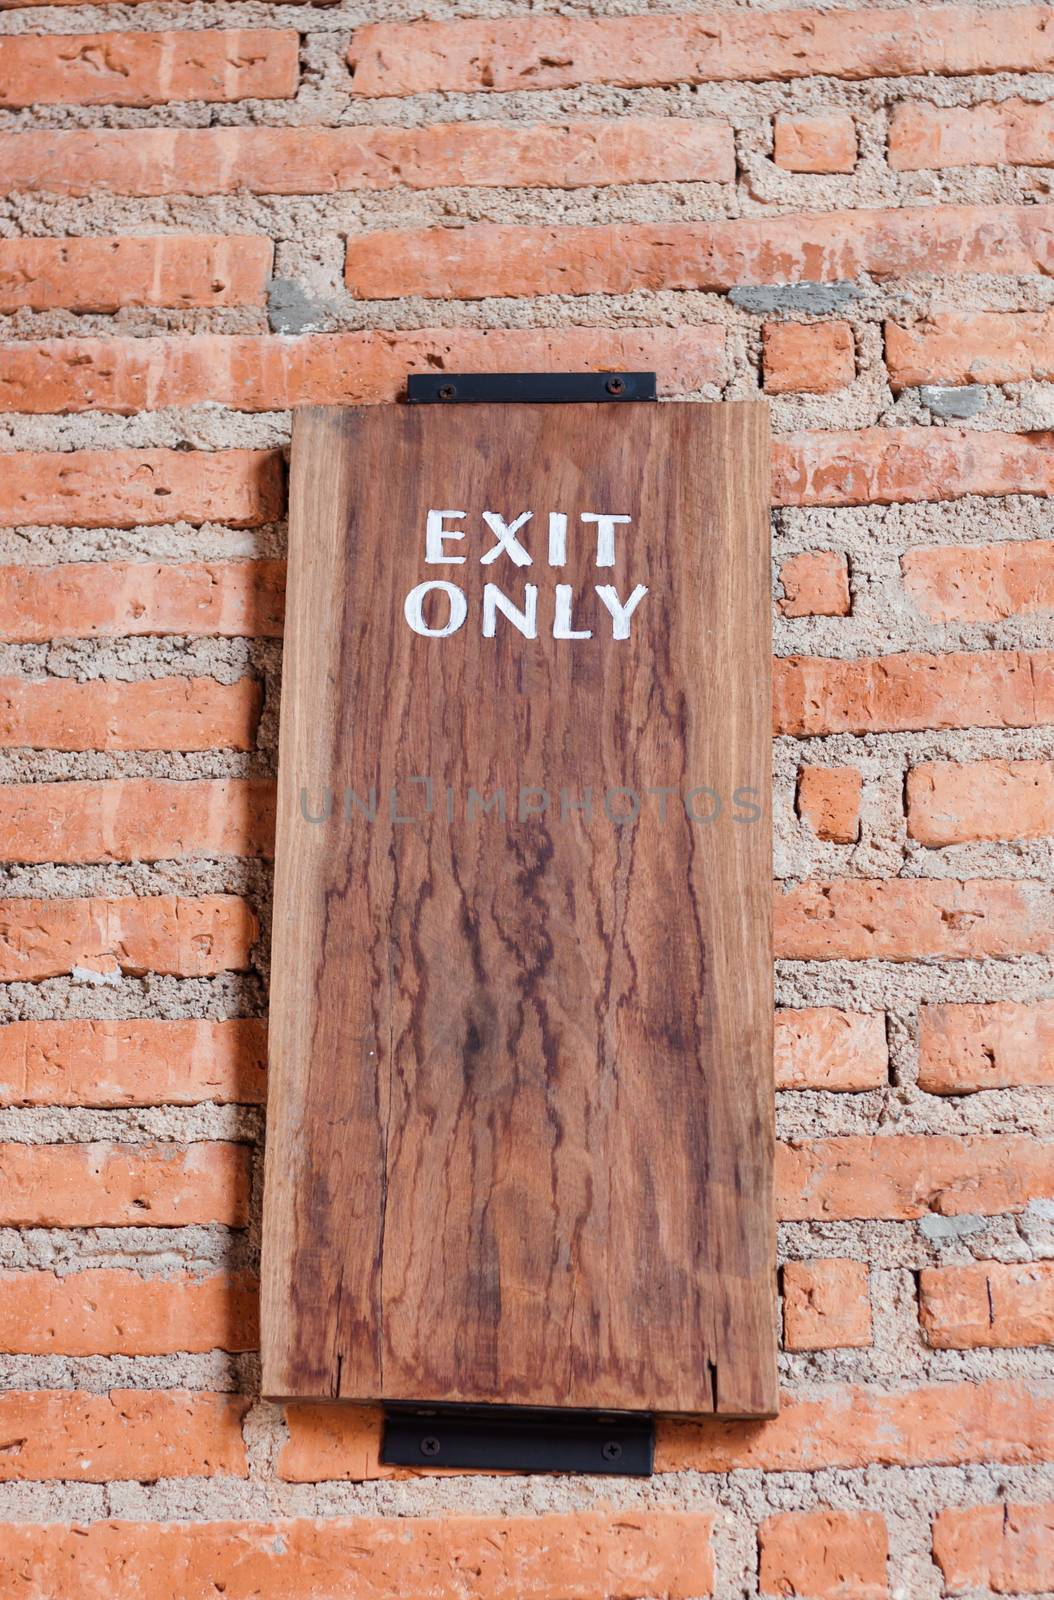 Exit only sign on brick wall, stock photo